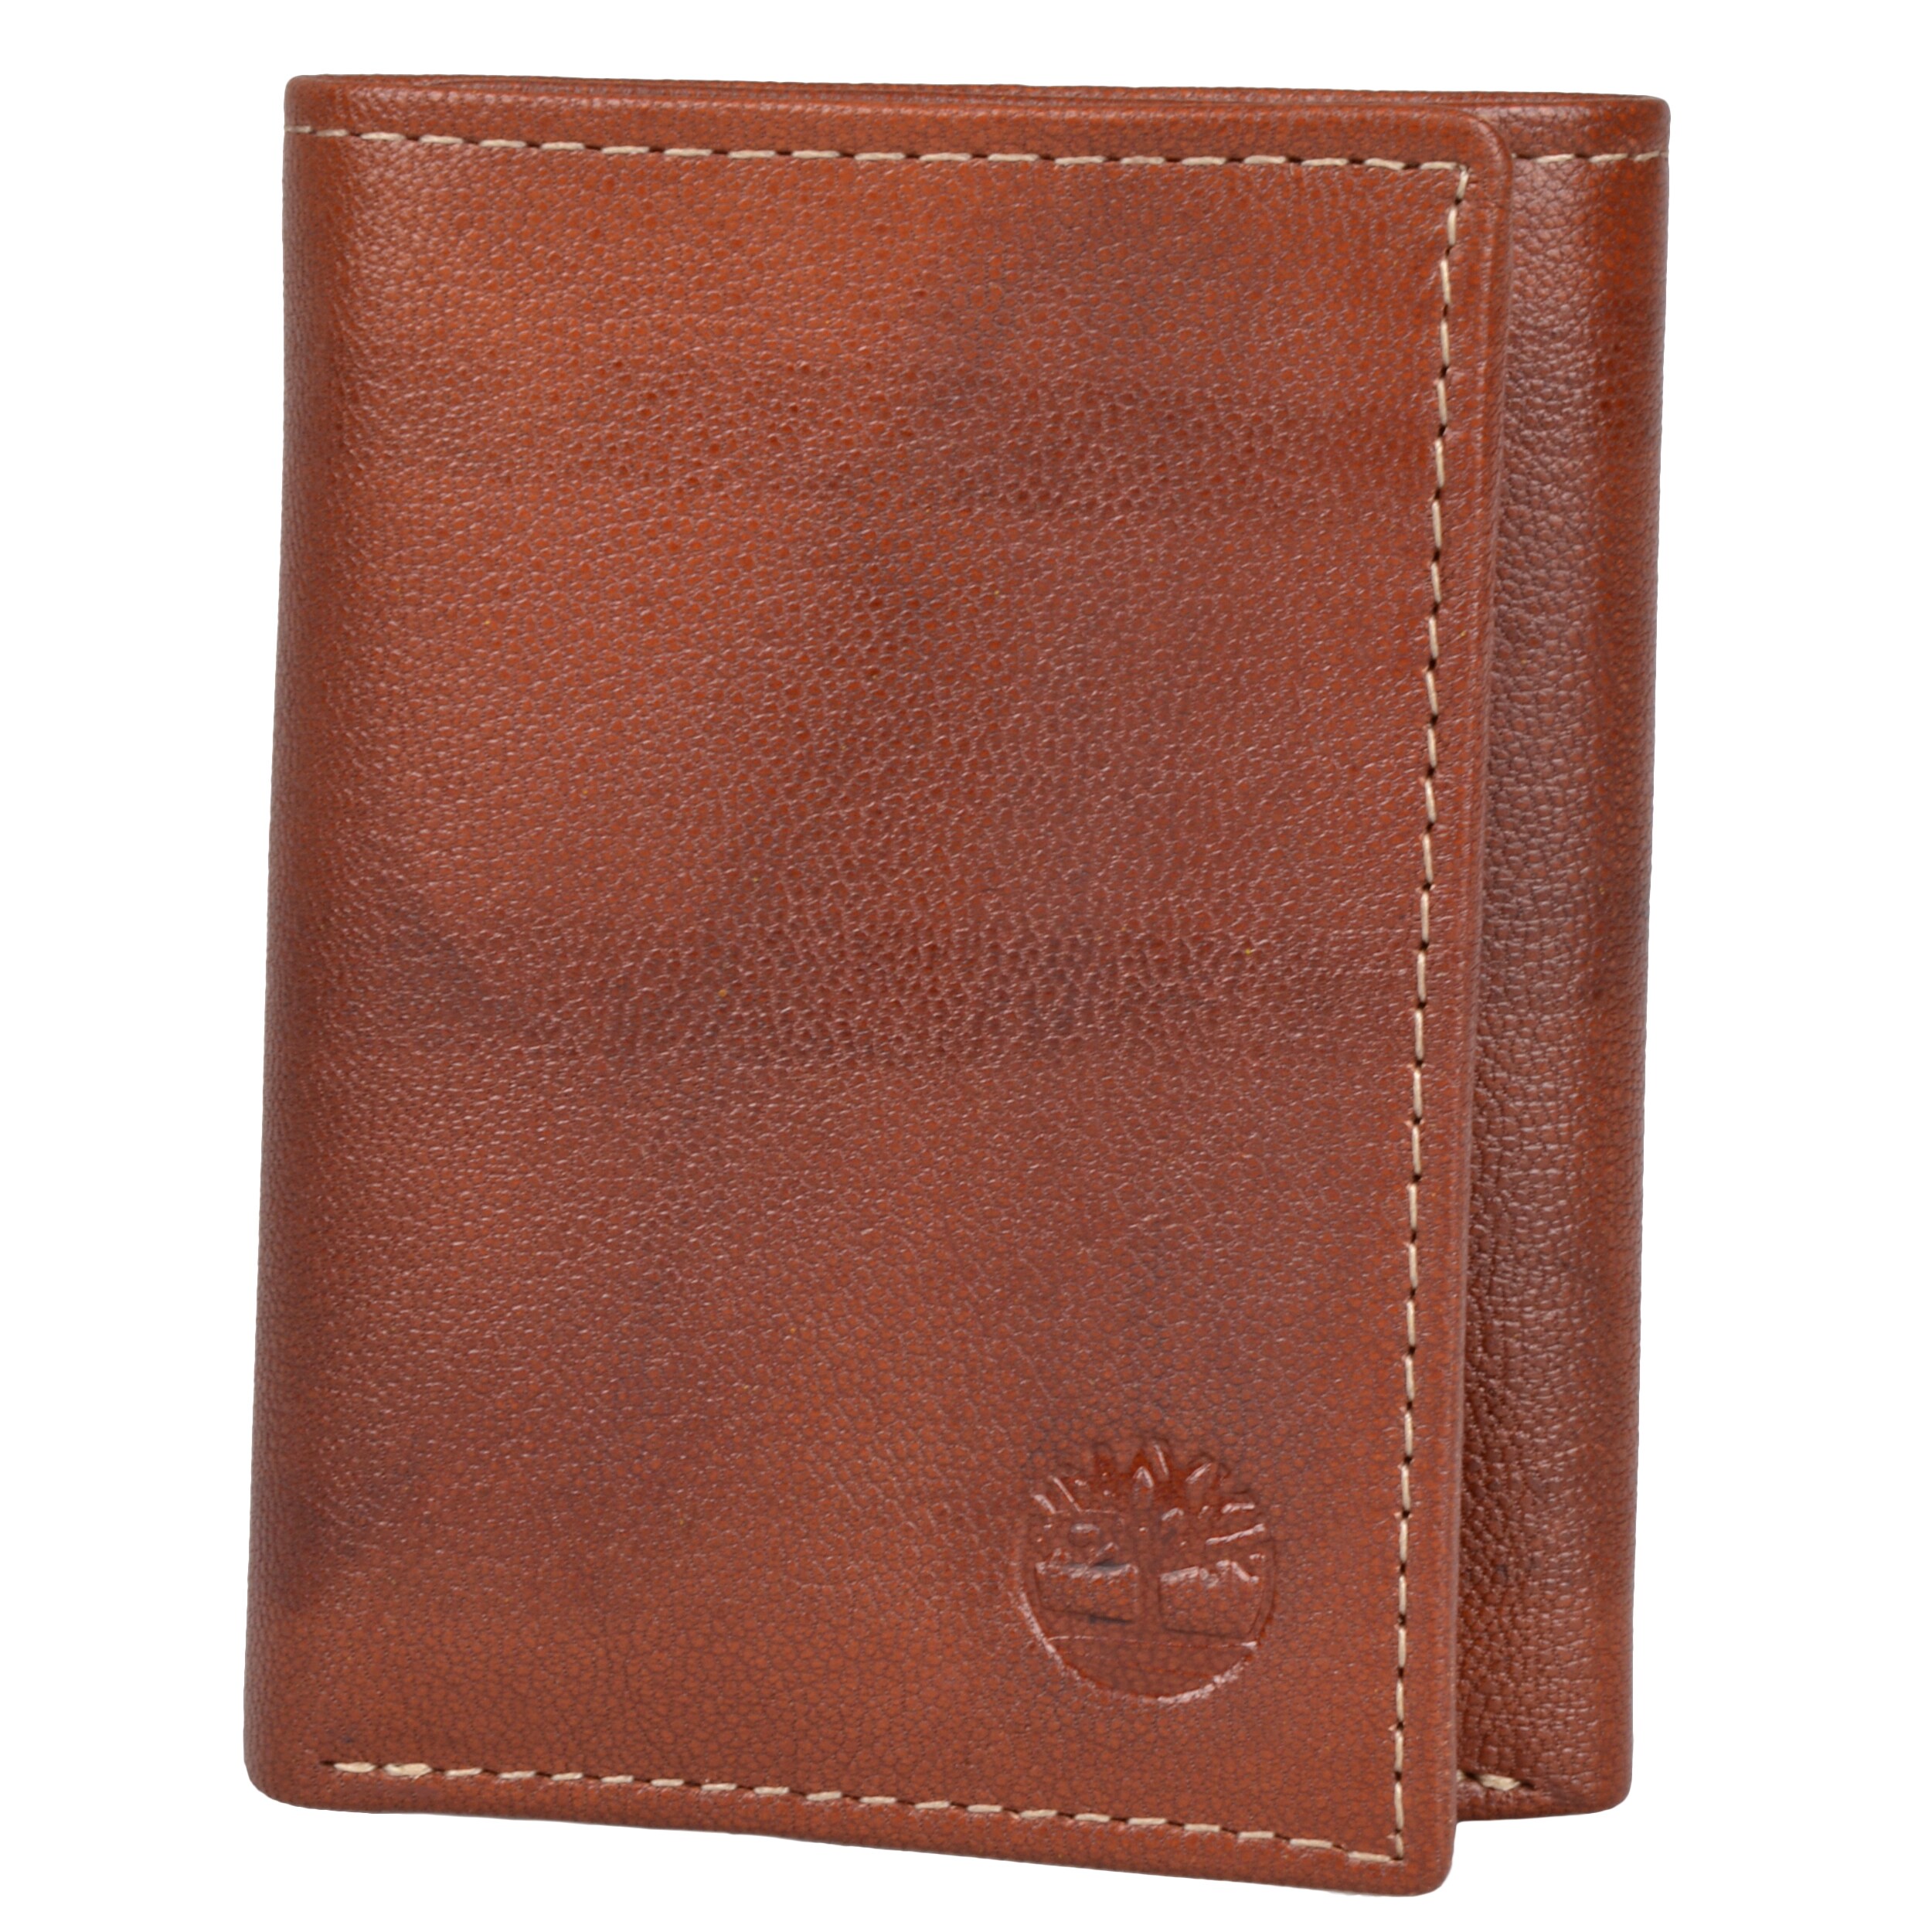 Timberland Mens Genuine Leather Trifold Wallet With Six Credit Card Slots